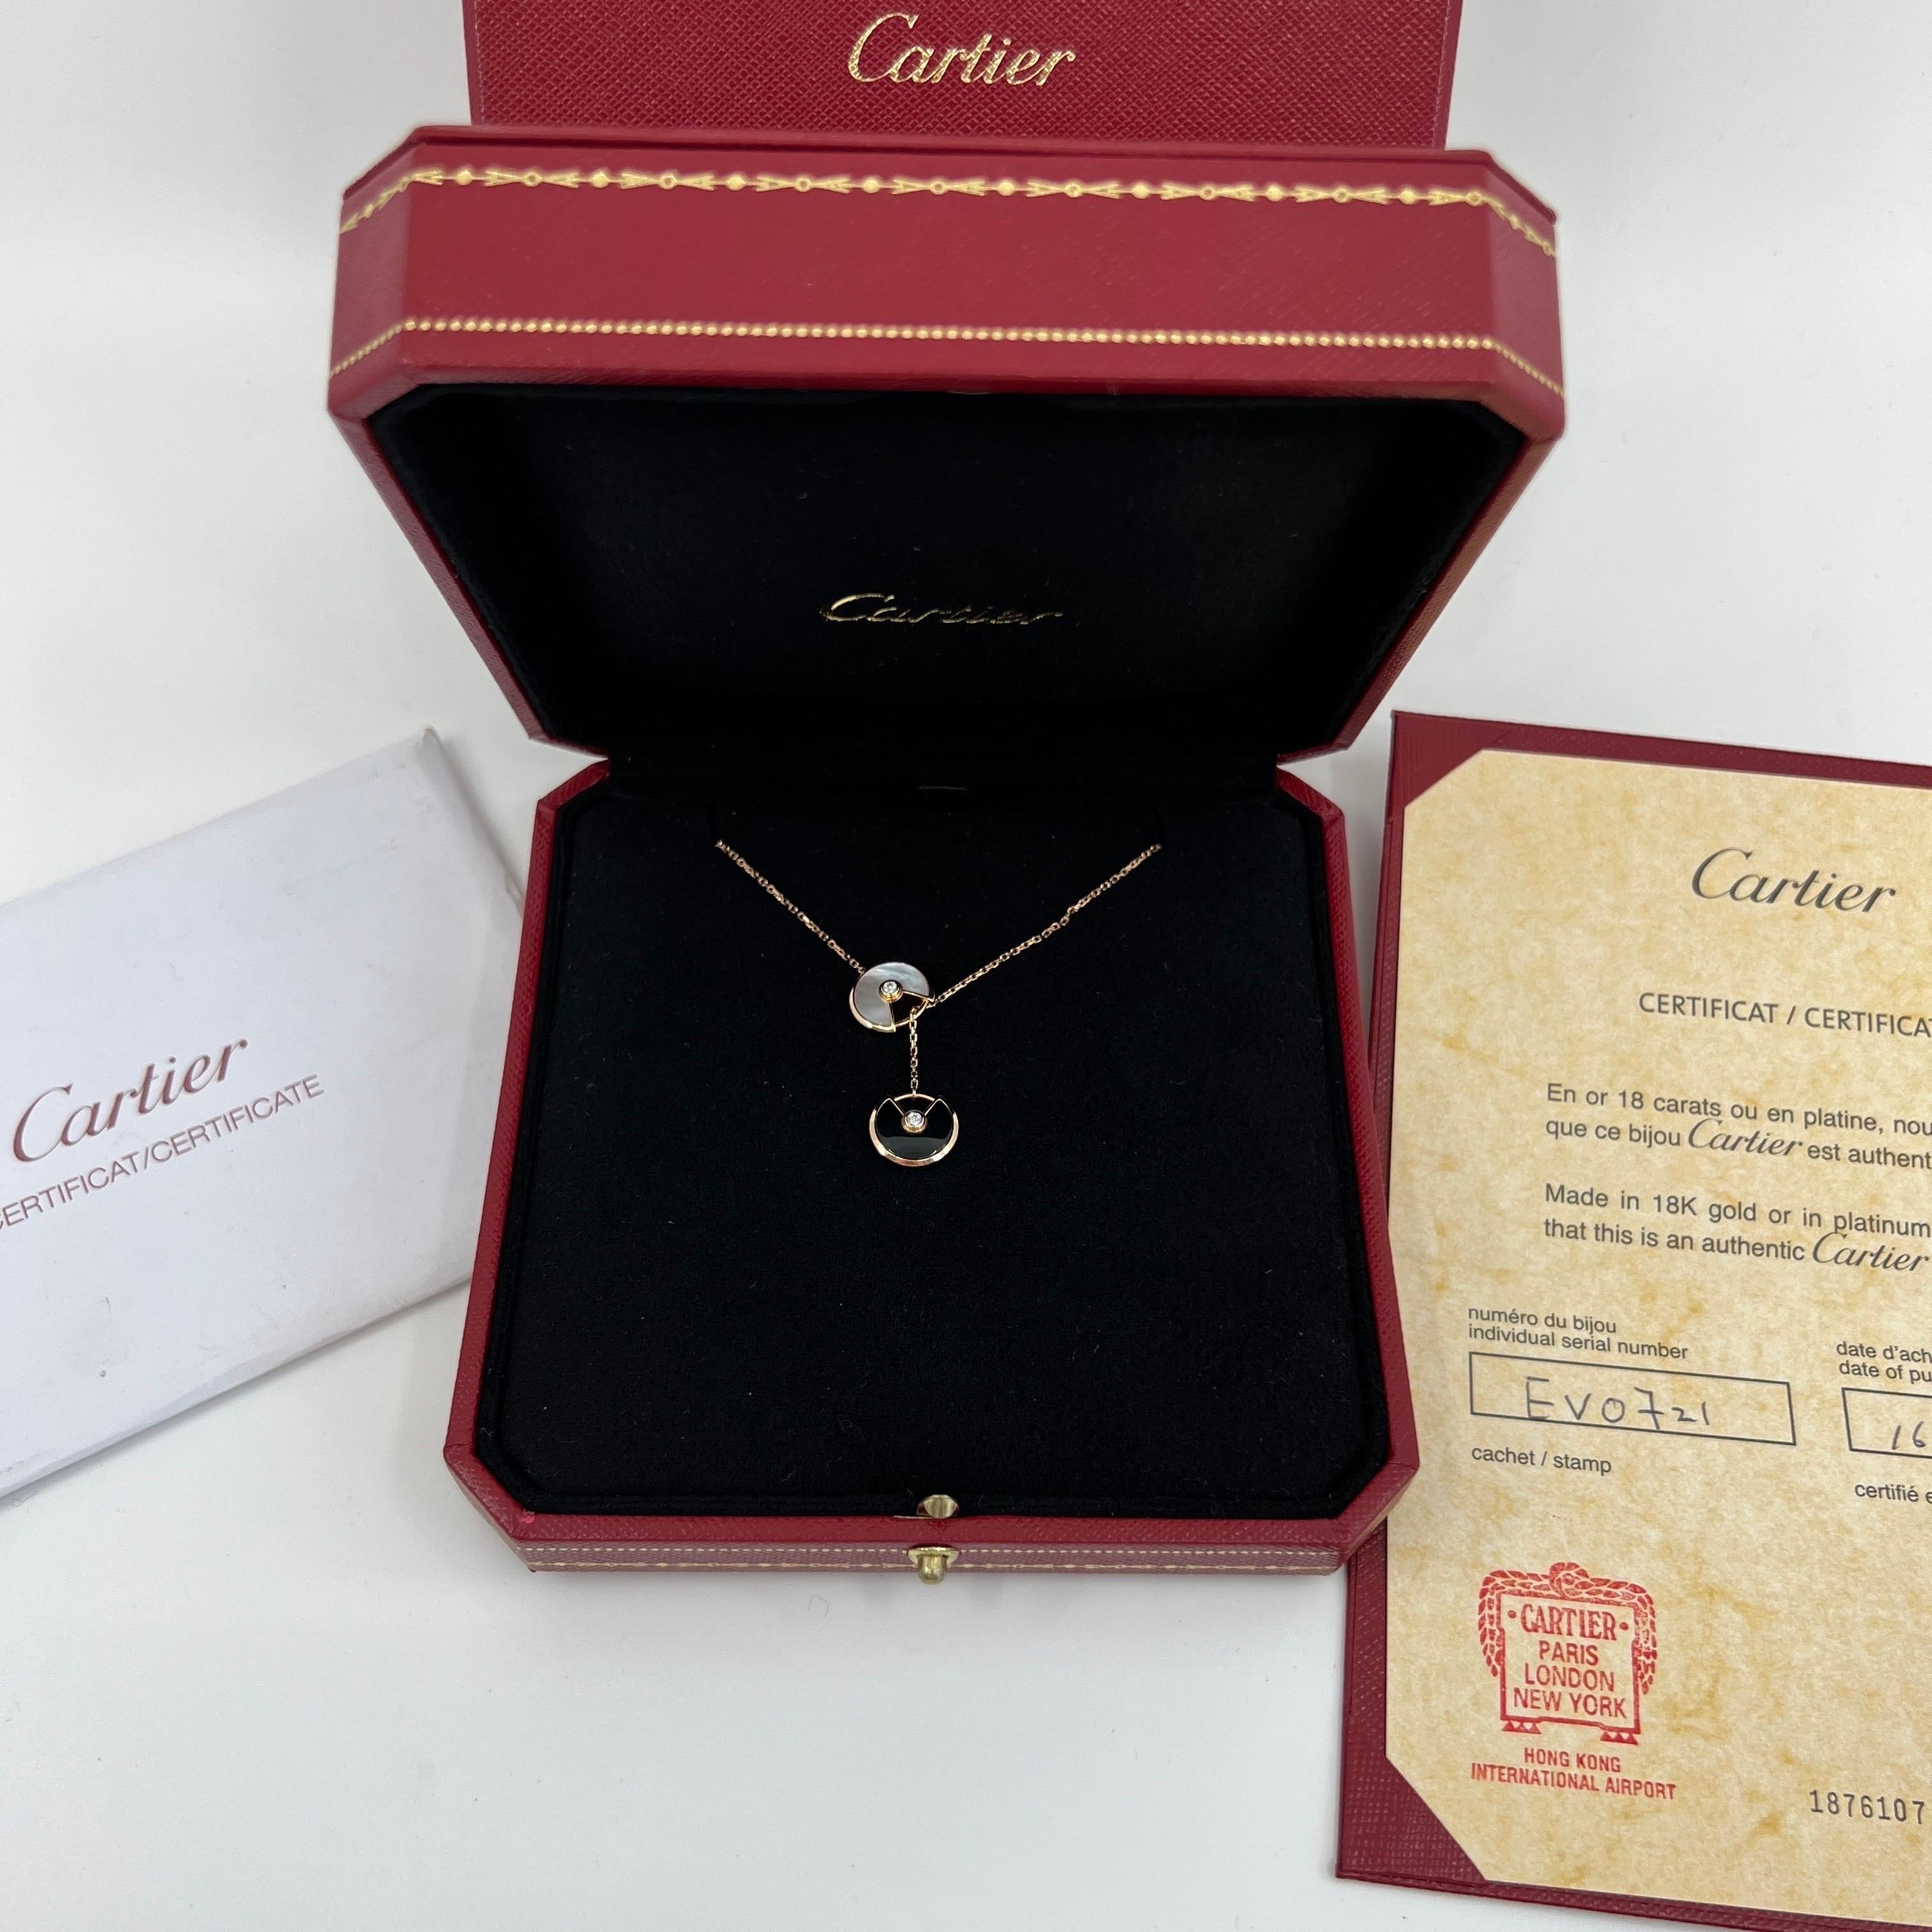  Amulette de Cartier Mother of Pearl And Onyx Amulet 18k Rose Gold Necklace.

Stunning rose gold necklace featuring two disk shaped amulets with diamond centres. One with mother of pearl inlay and the other with black onyx.
Fine jewellery houses